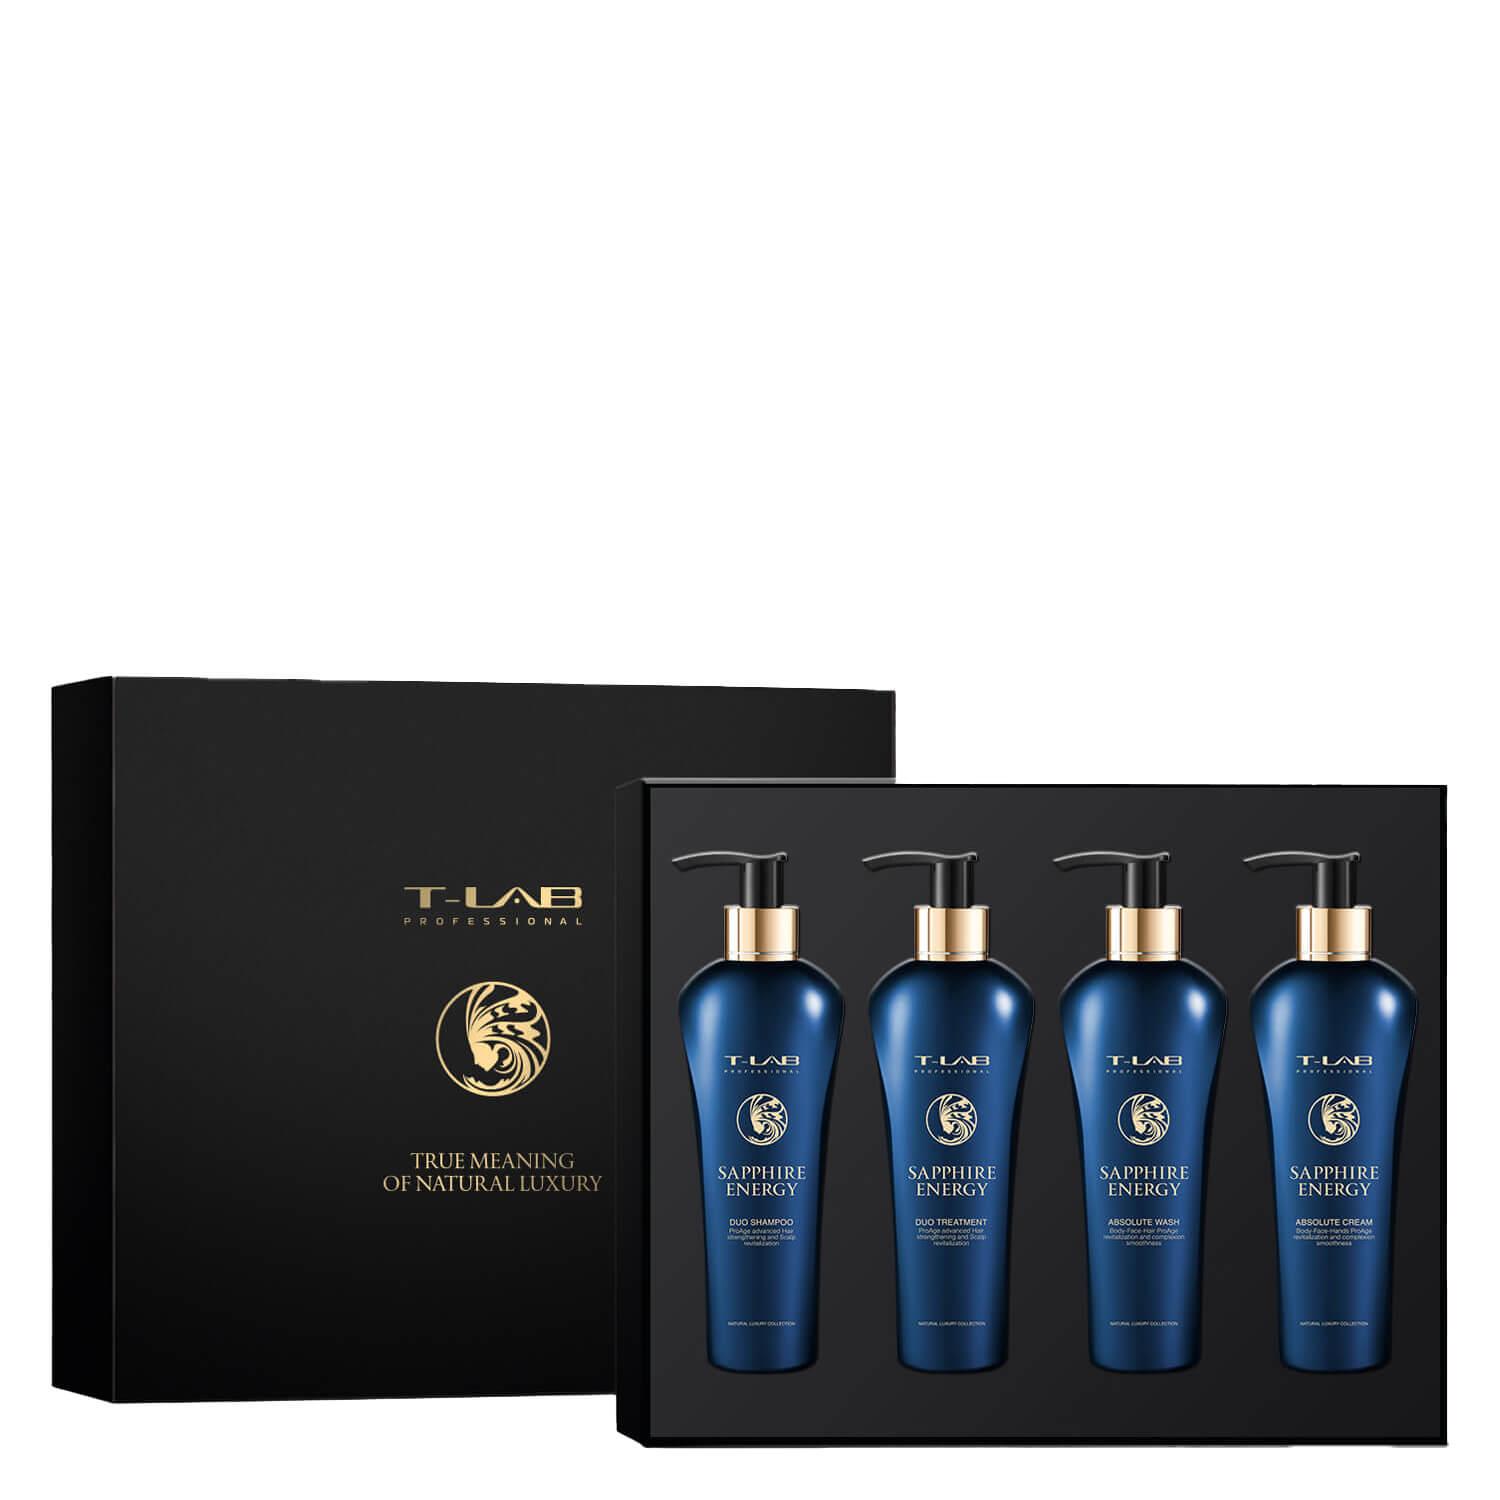 Sapphire Energy Magical & Radiant You Luxury Gift